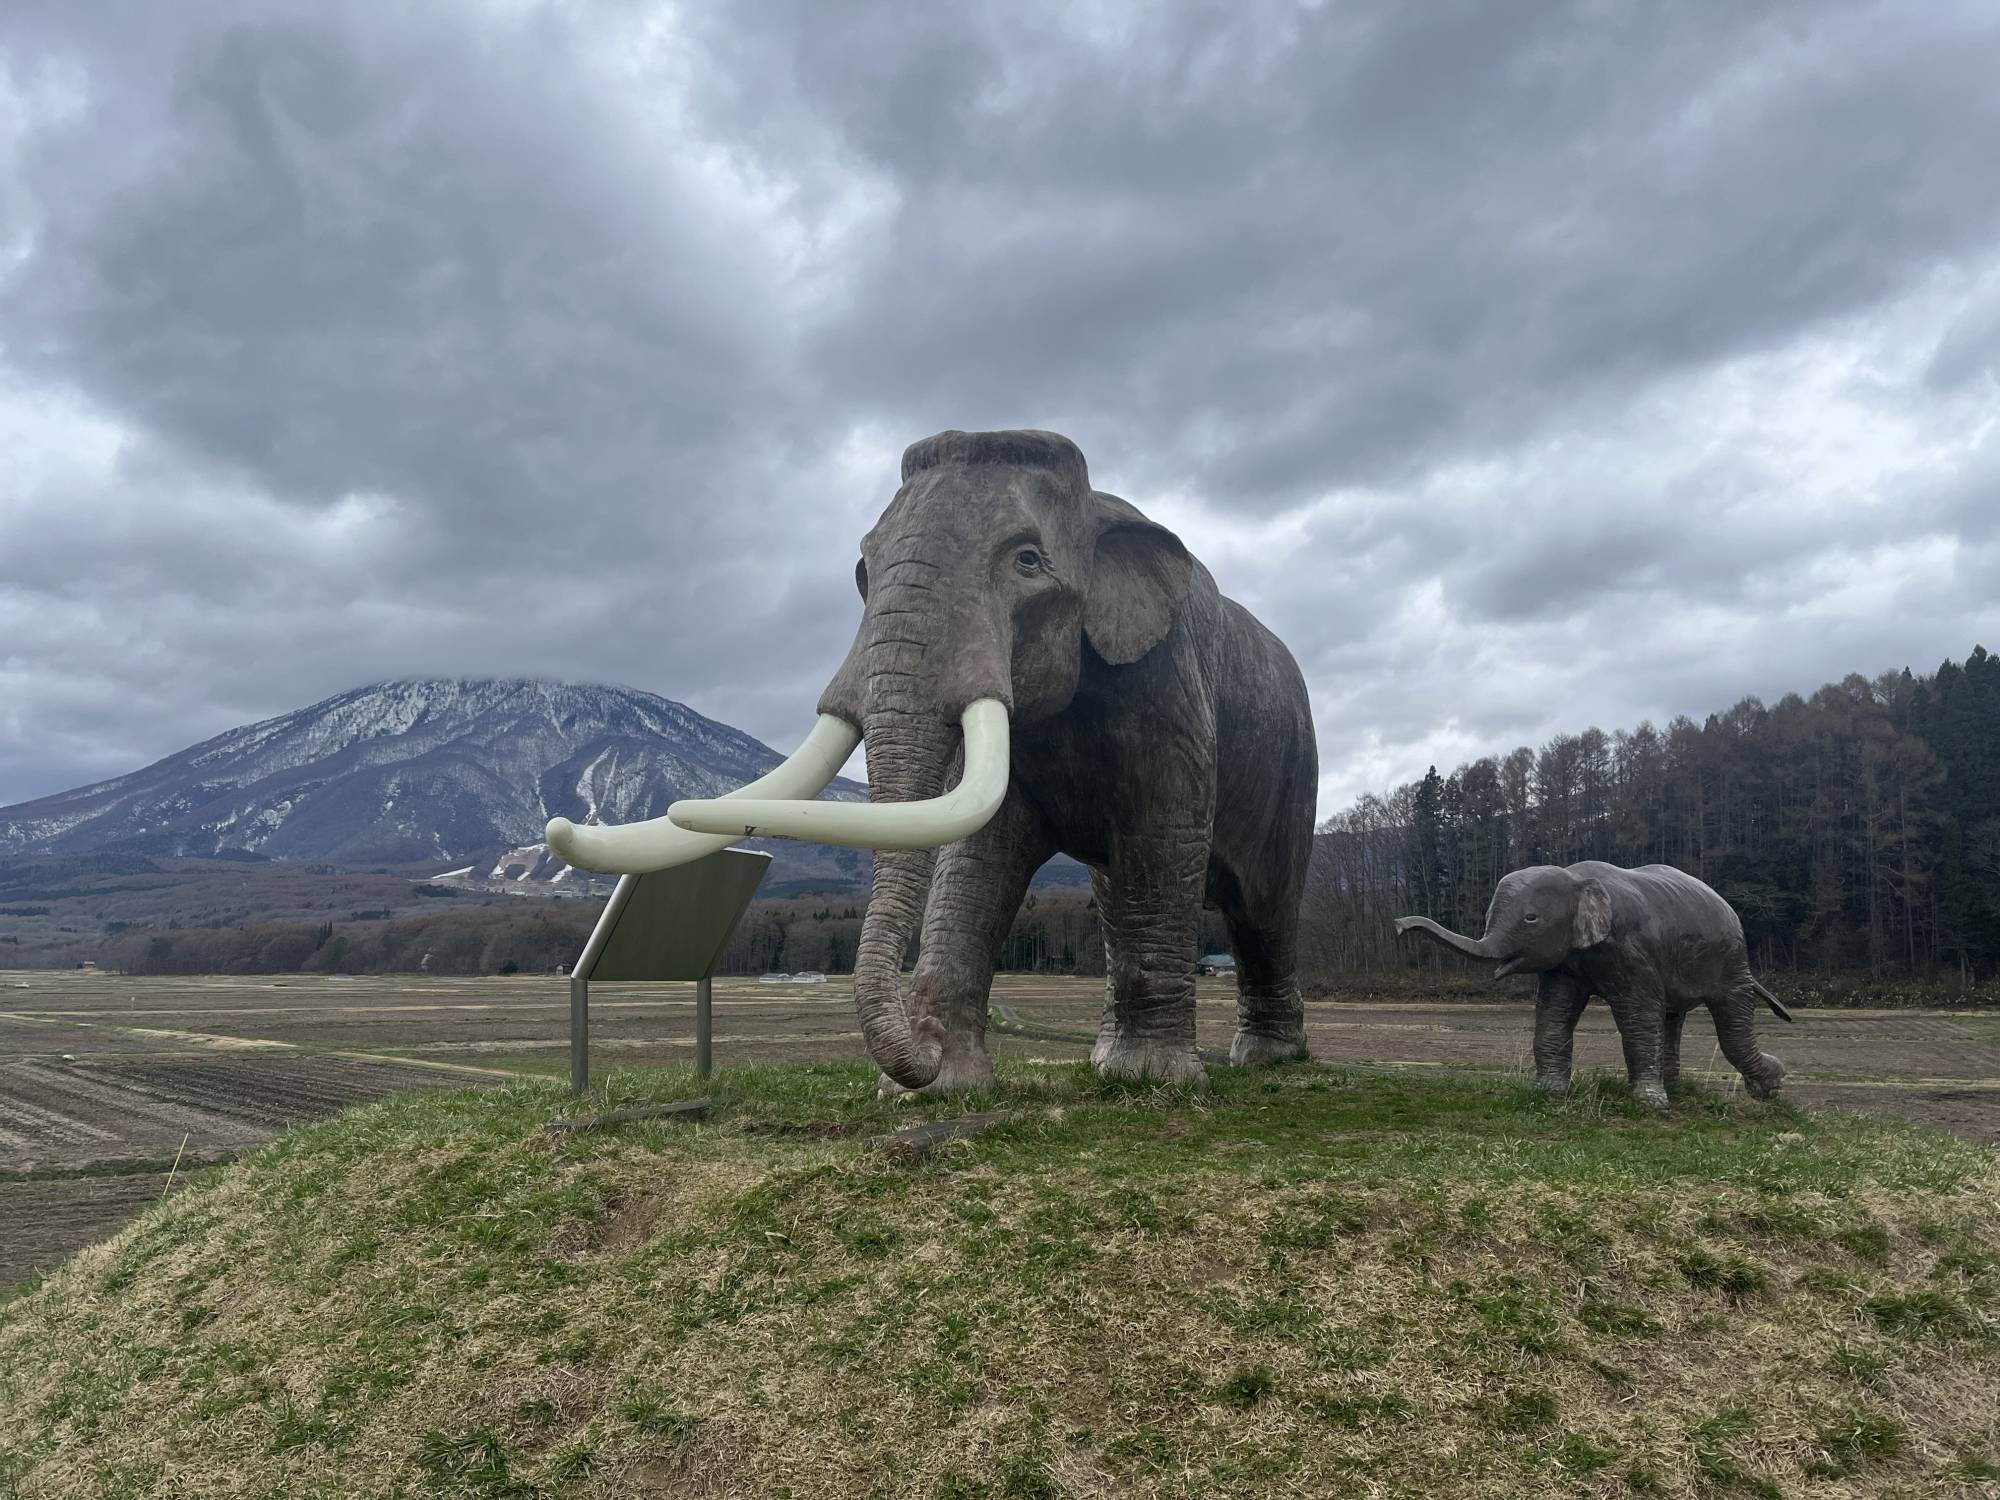 In Nagano, an excavation of Japan's ancient elephant looks to